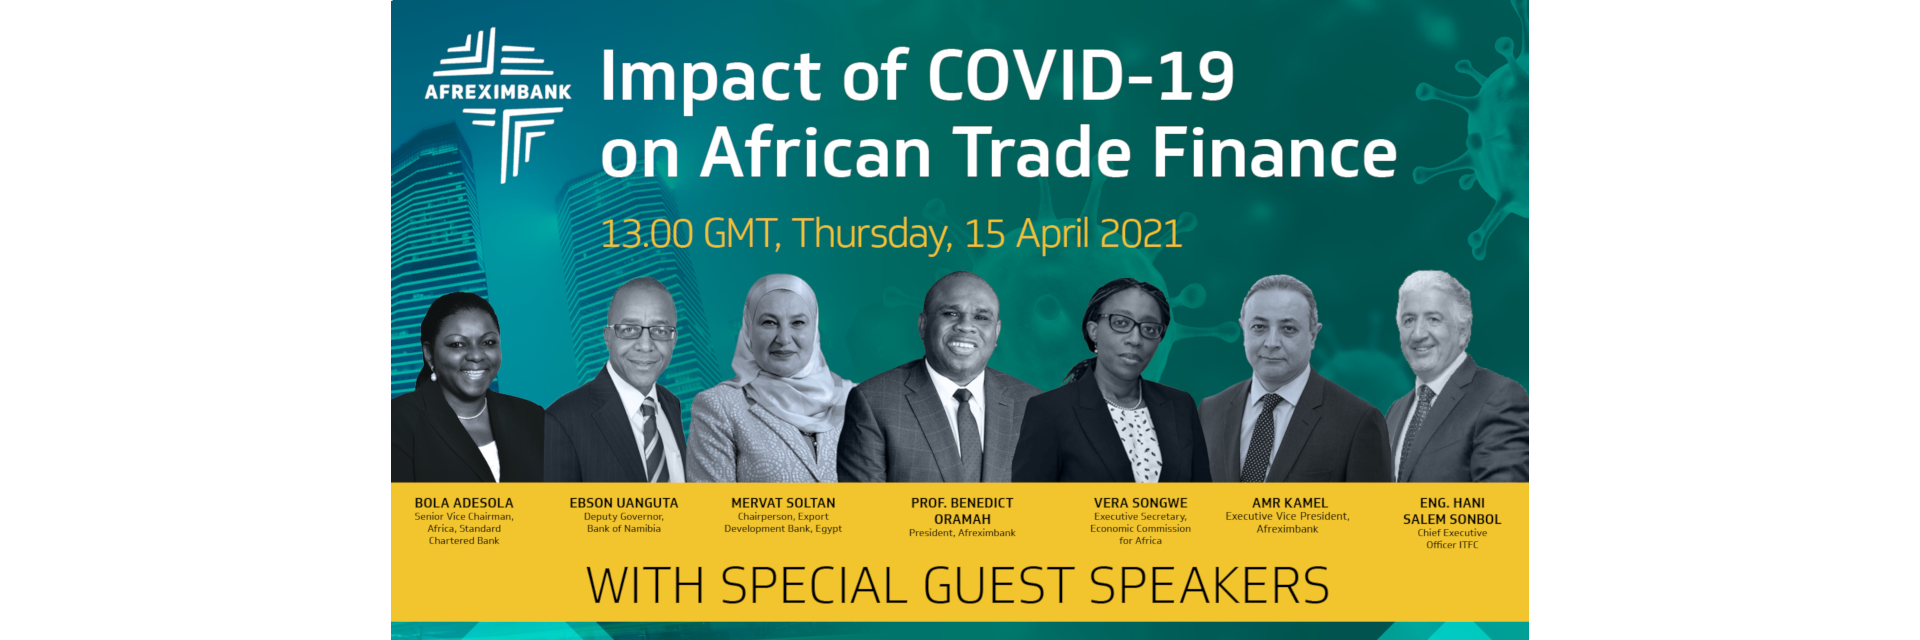 New report highlights COVID-19 impact on African trade finance